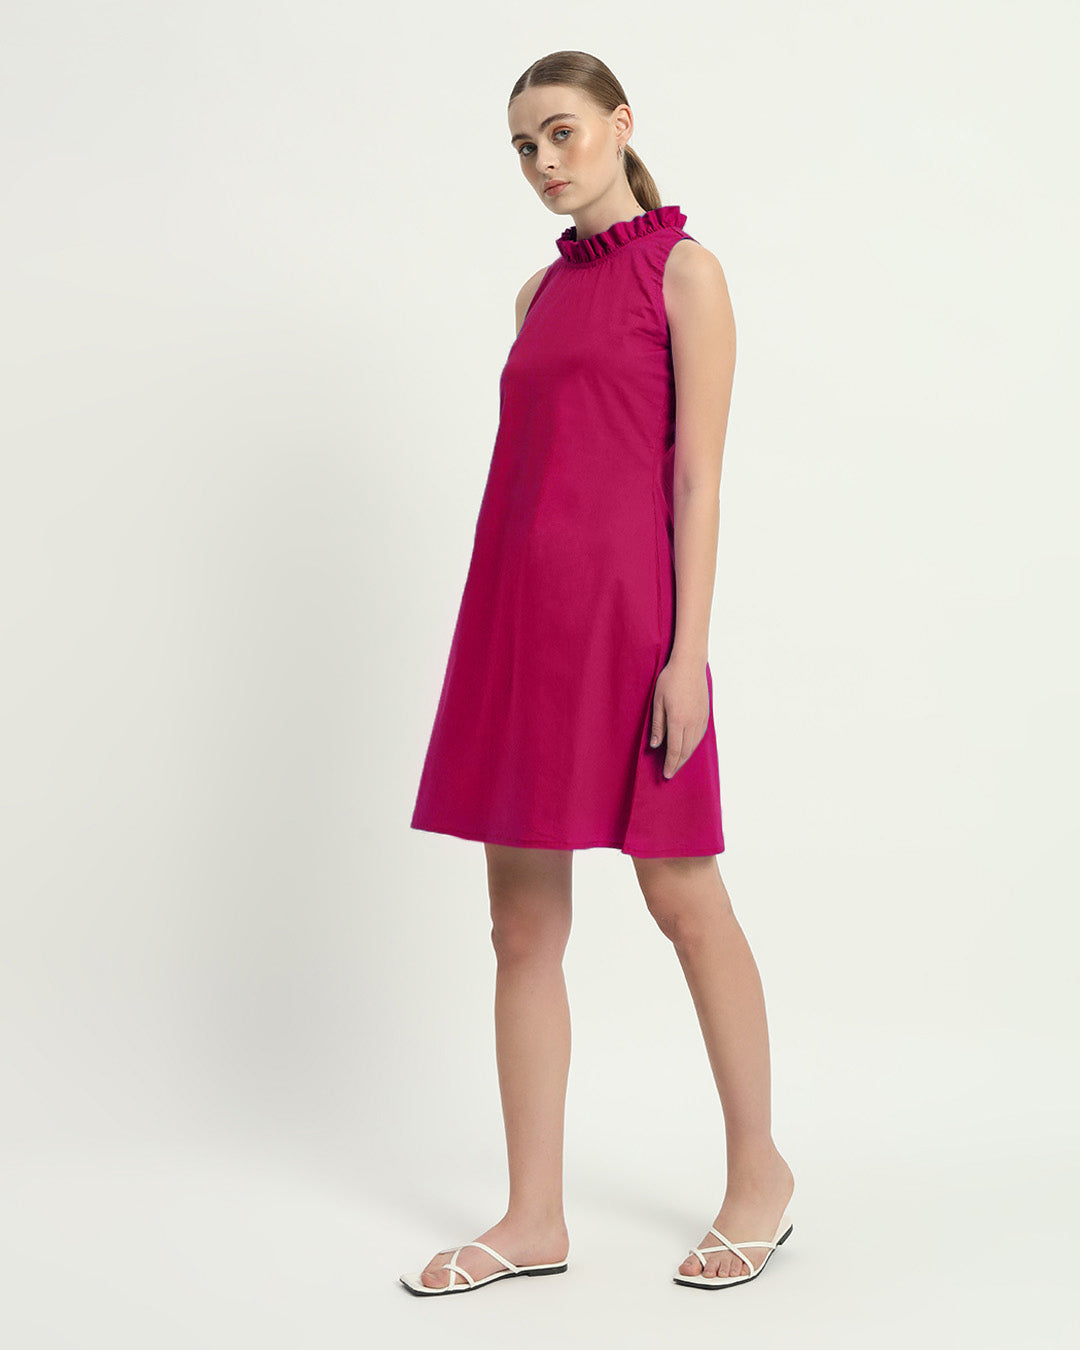 The Berry Angelica Cotton Dress